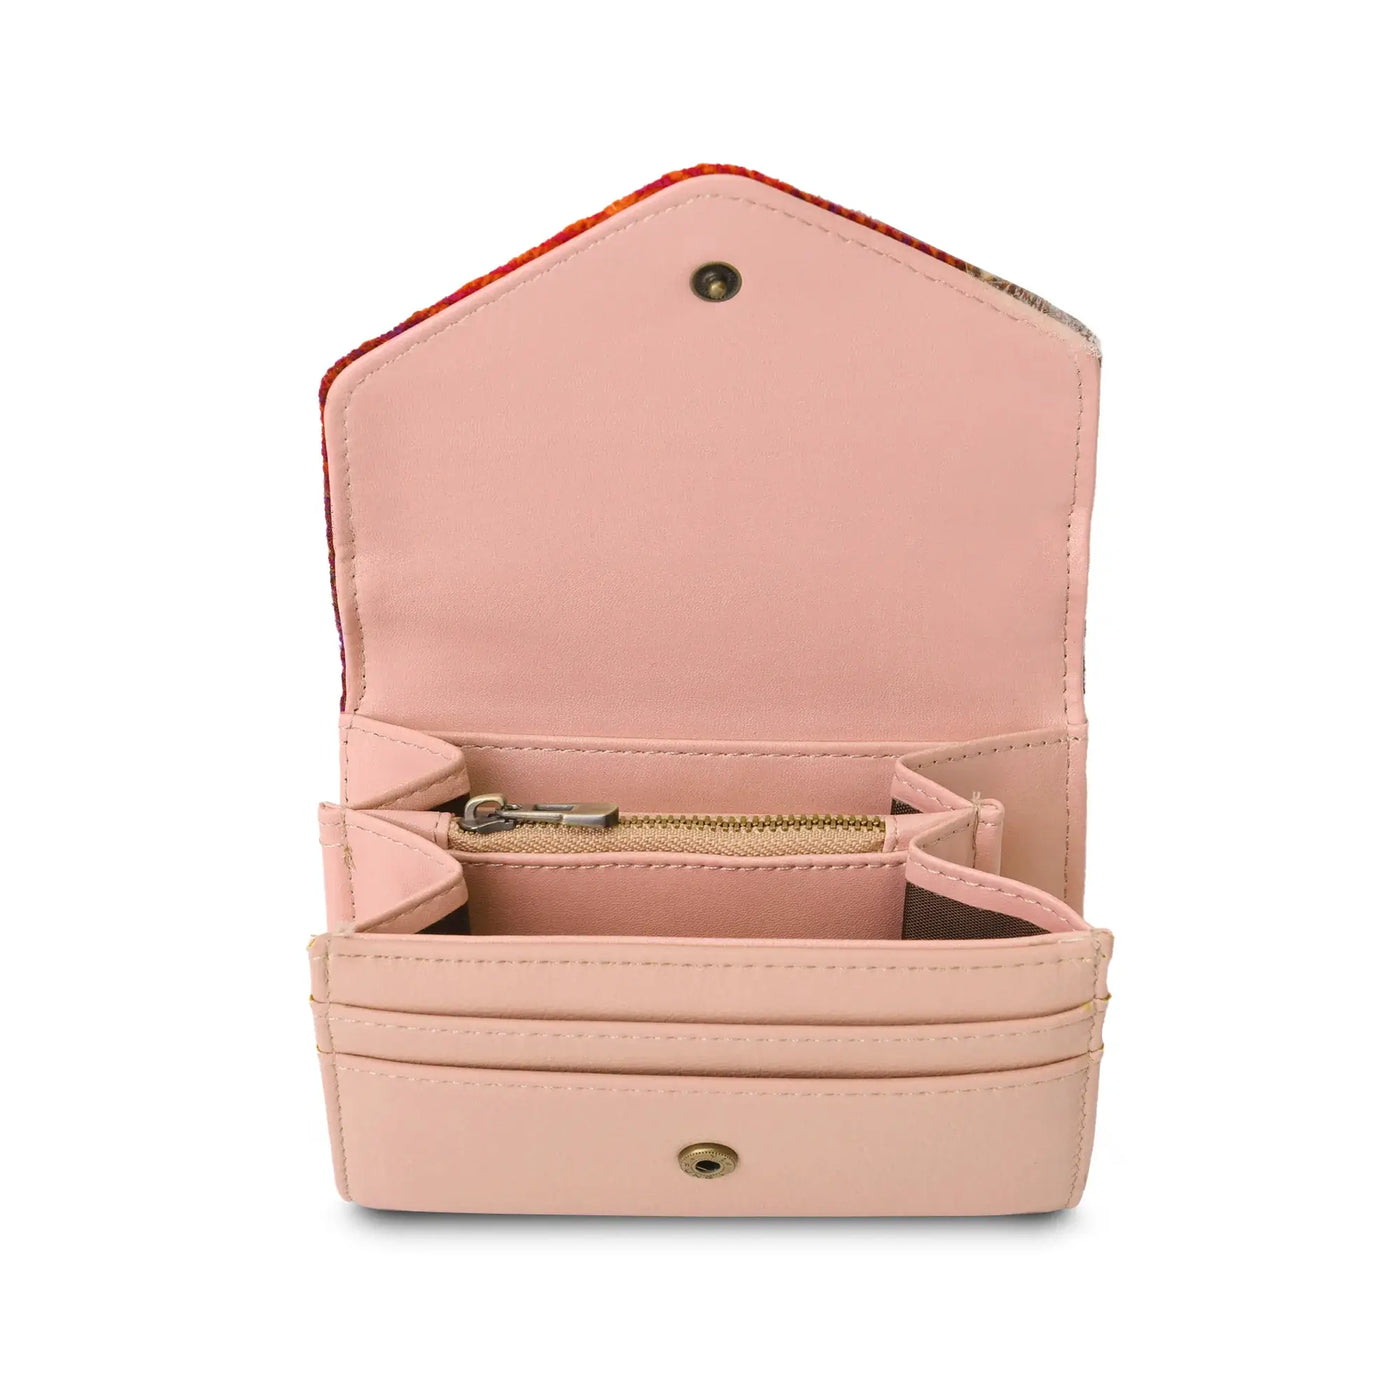 KAHNISA - CORAL | Accessories | Ted Baker UK